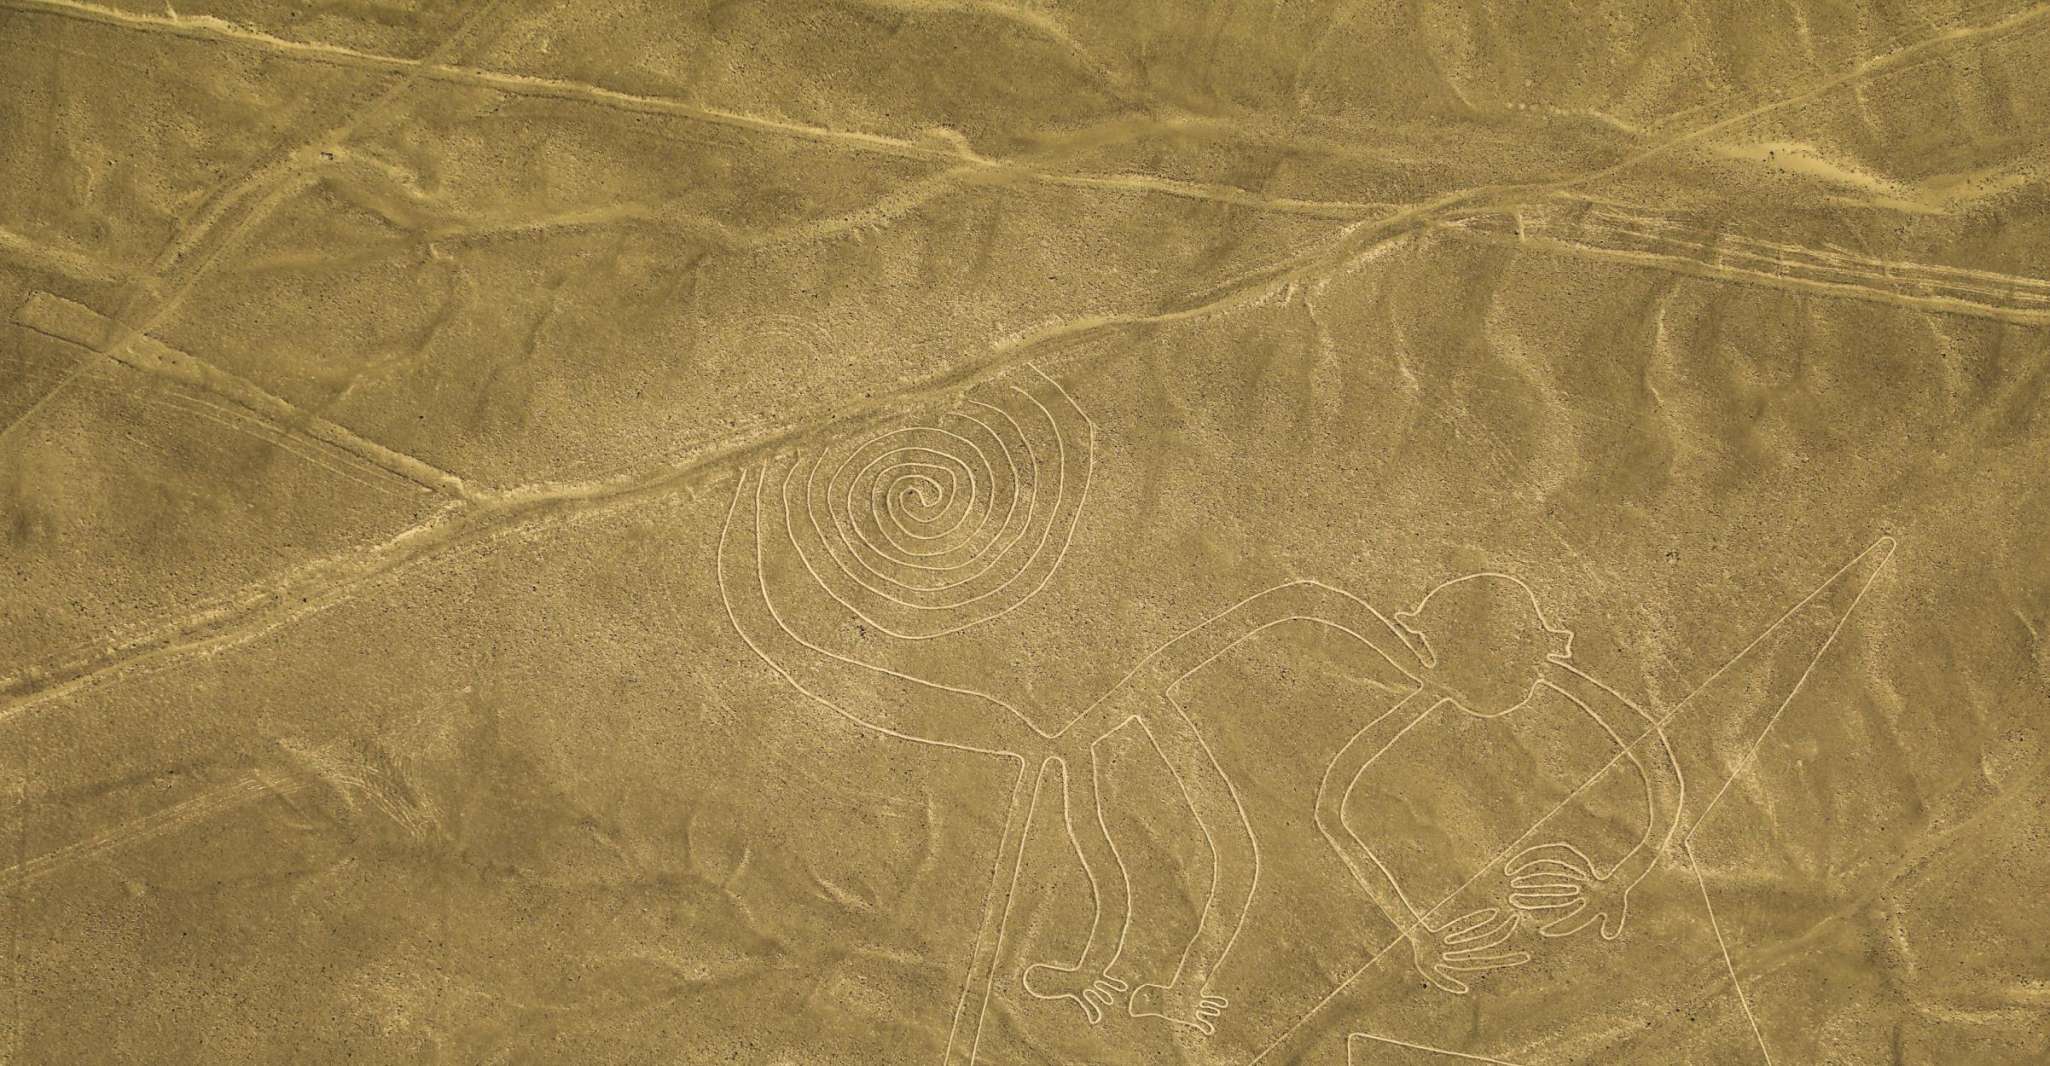 From Nazca, 35-Minute Flight Over Nazca Lines - Housity